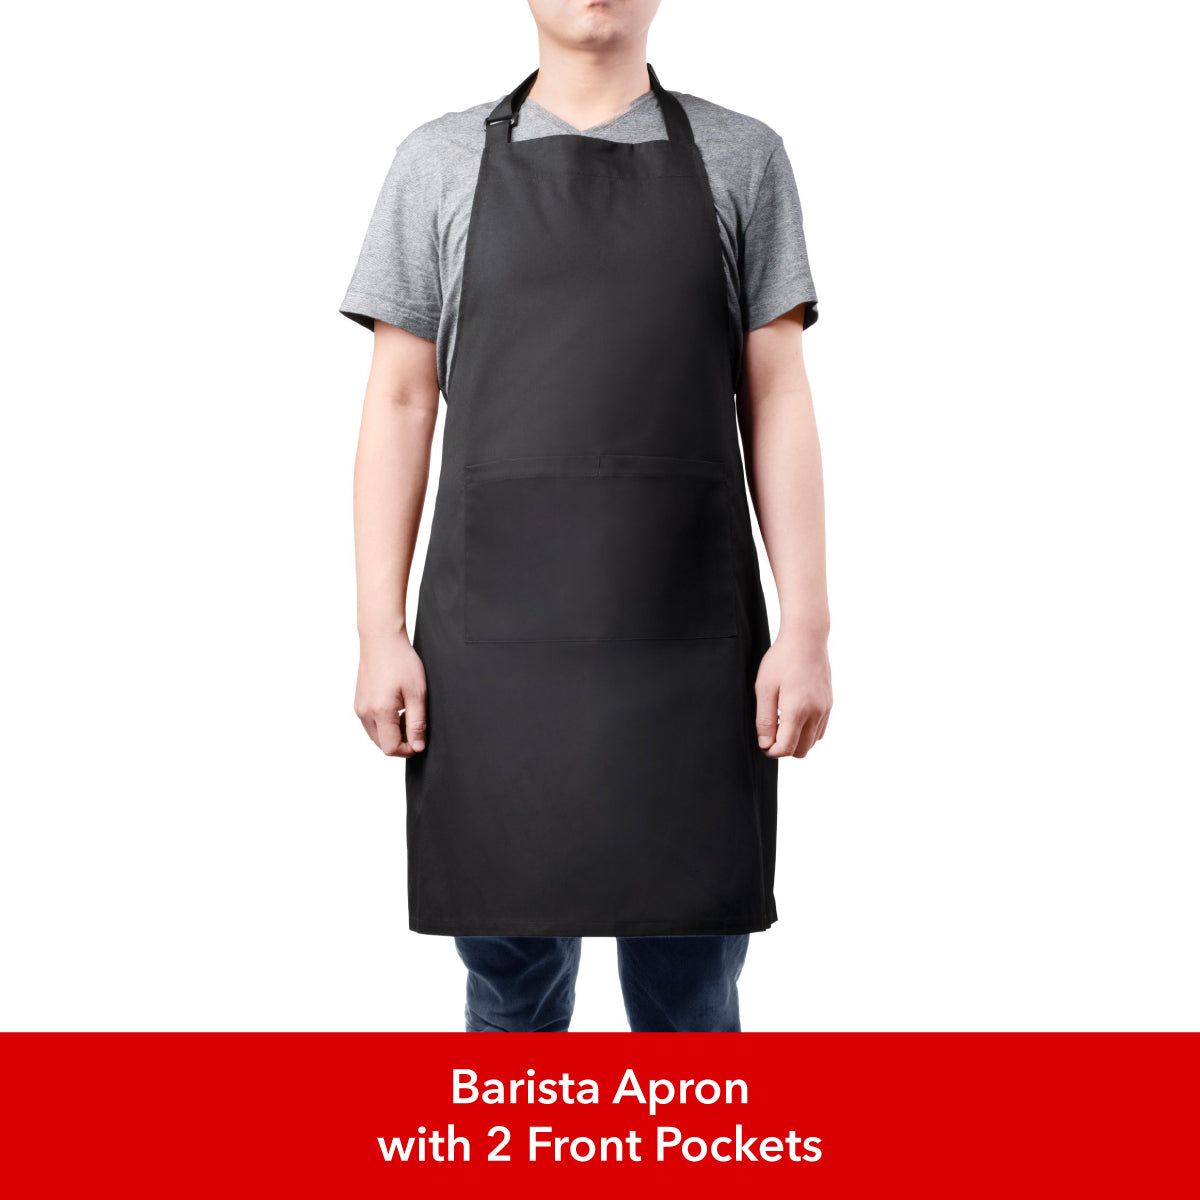 Barista Apron With 2 Front Pockets as part of the EspressoWorks Pour Over Coffee Bundle